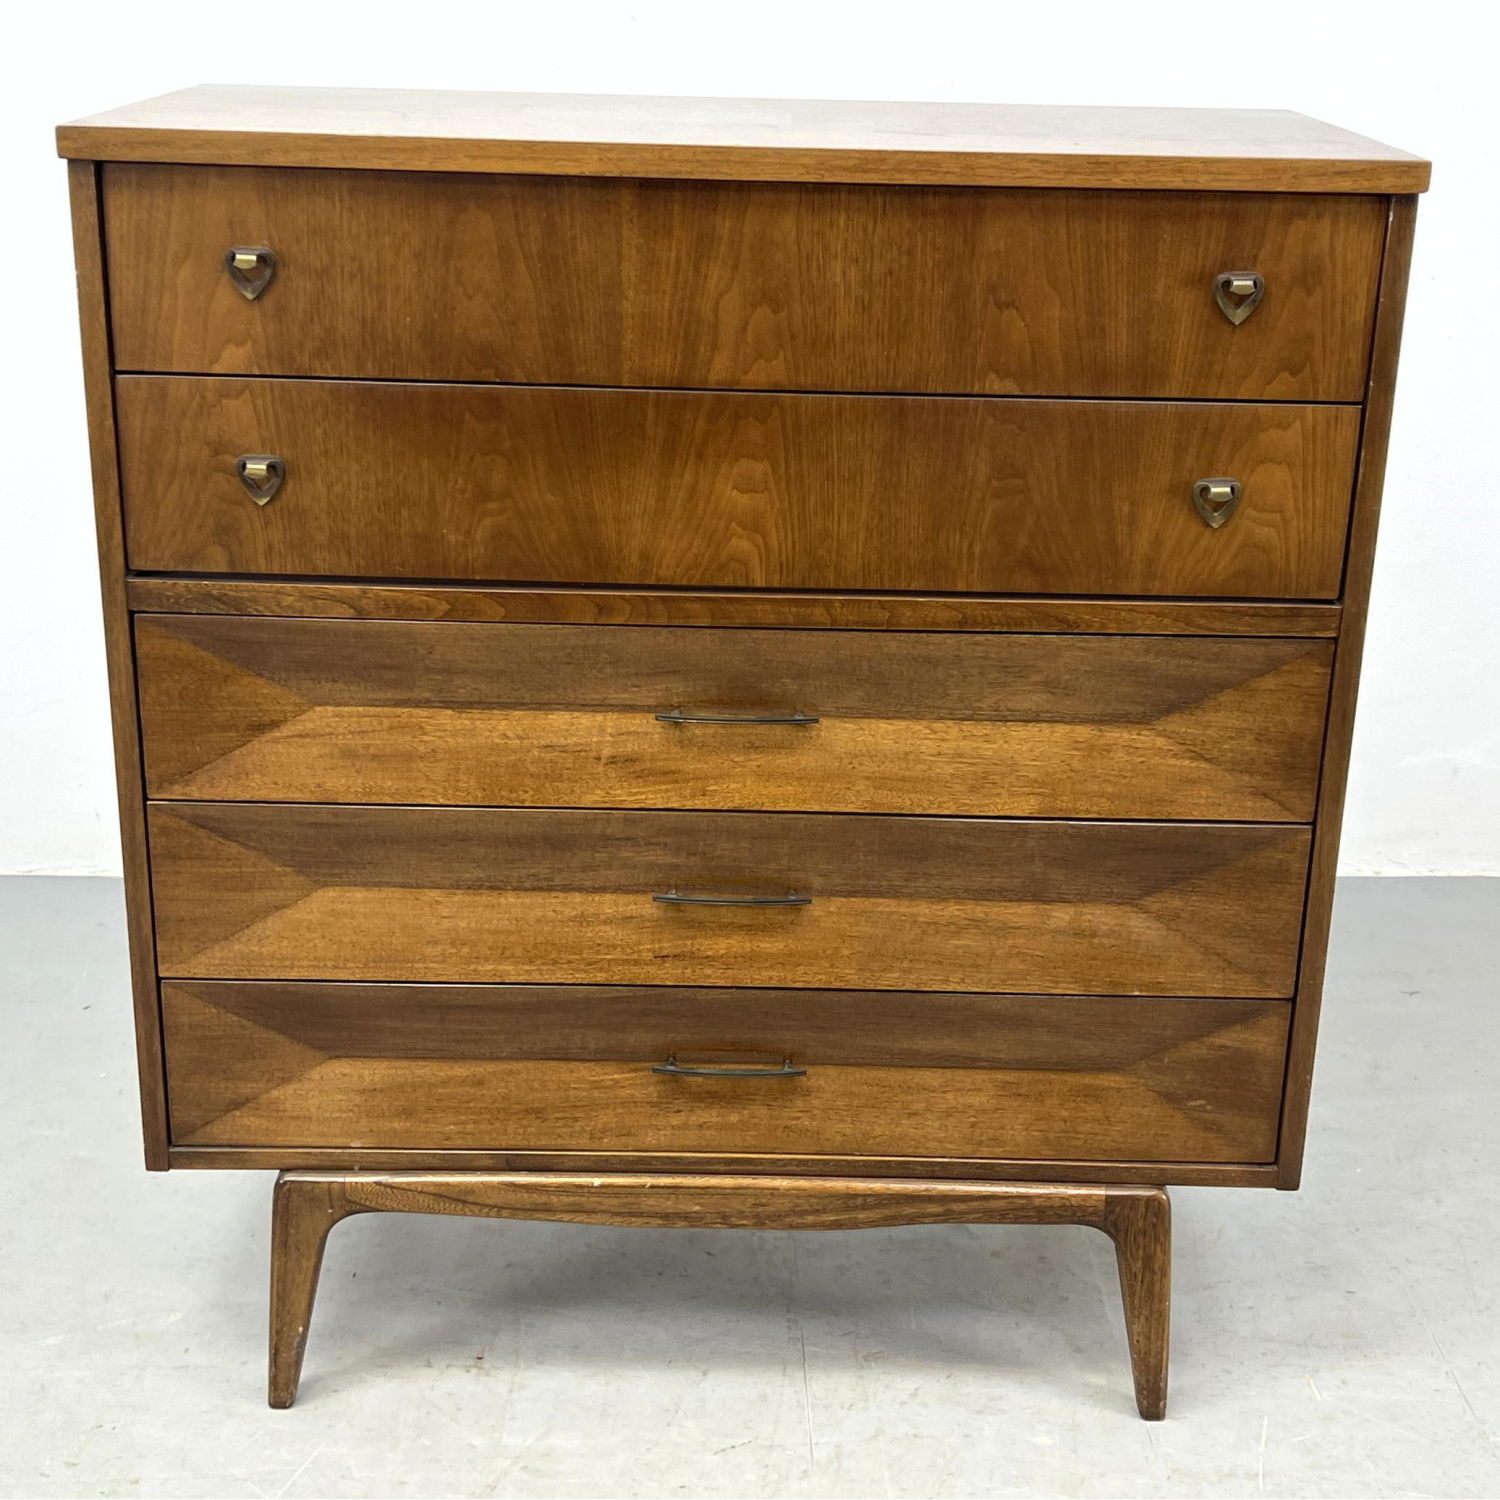 UNITED tall chest of drawers dresser.